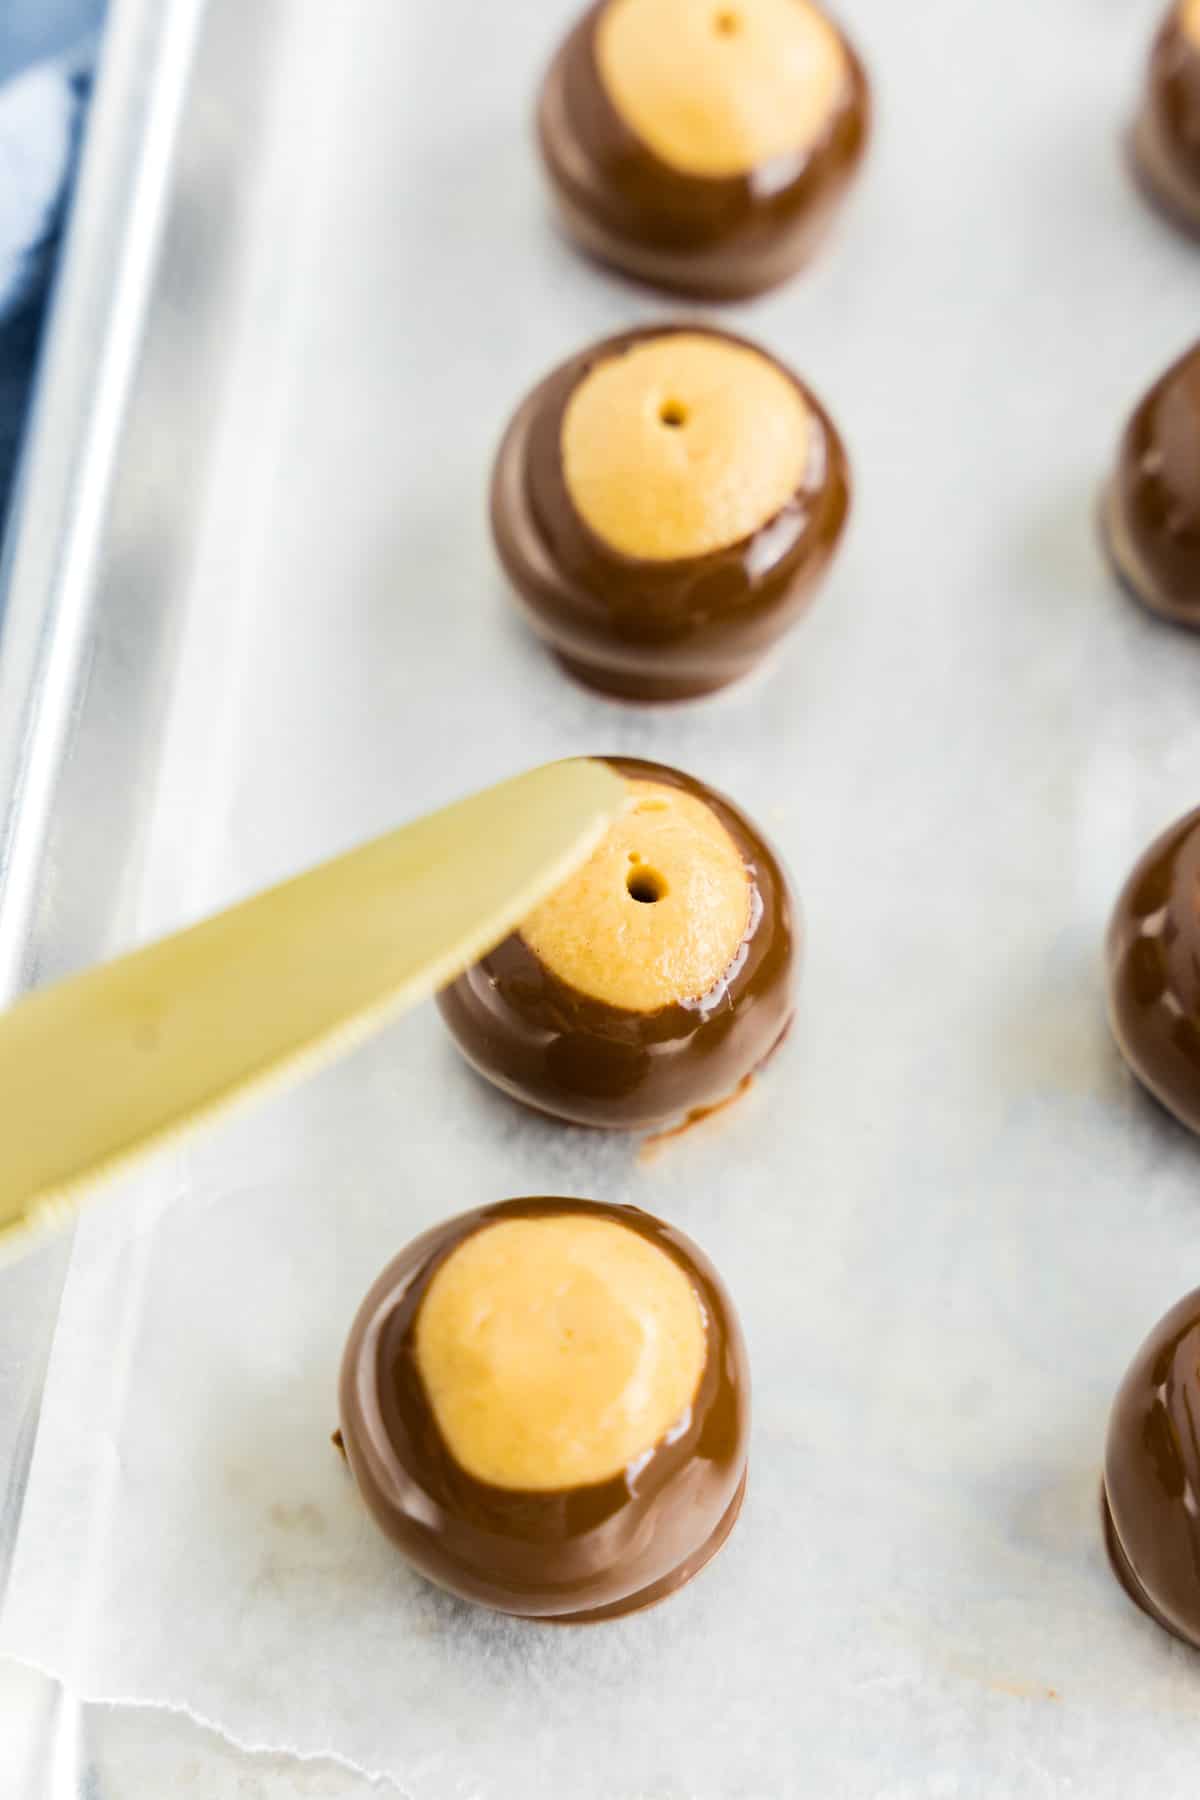 Knife smoothing out holes in buckeyes